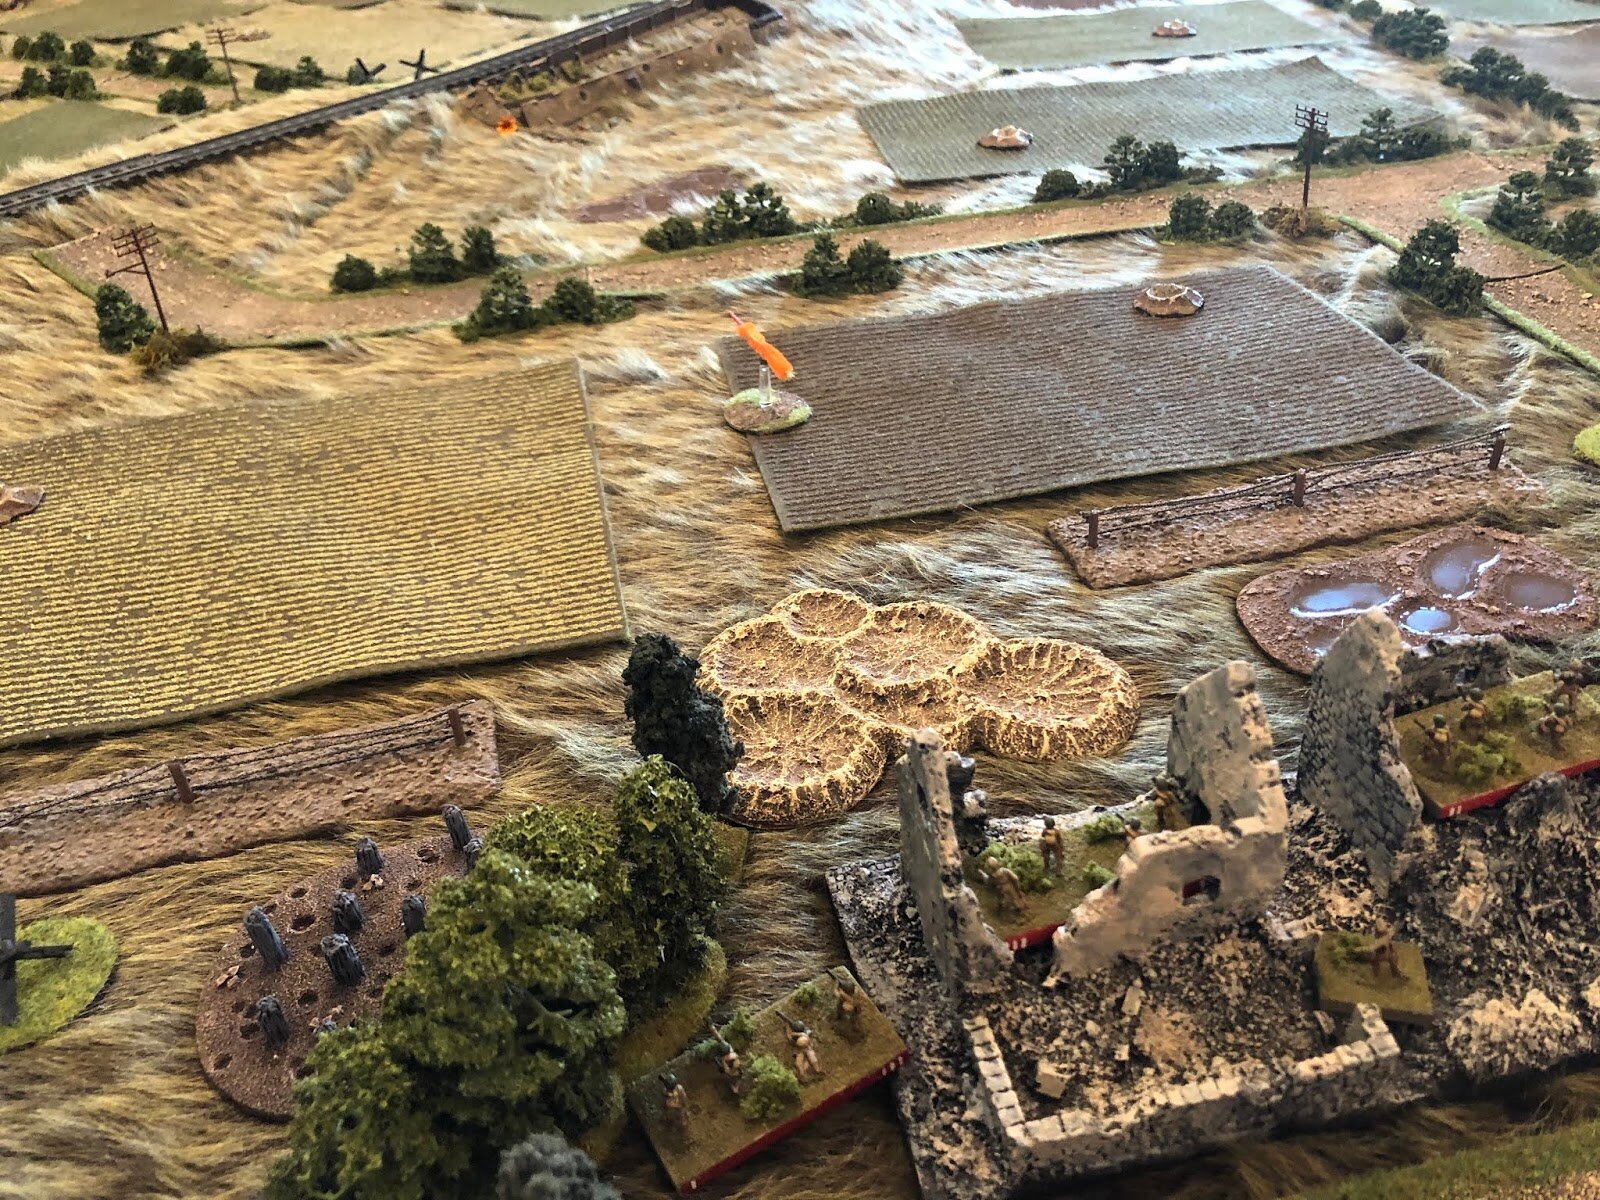  The Soviet 3rd Rifle Platoon, in the Collective Farm (bottom right) begins exchanging ineffectual fire with the German 2nd Platoon, 2nd Company, which has managed to occupy the former-Soviet trench on the railway embankment (top center). 